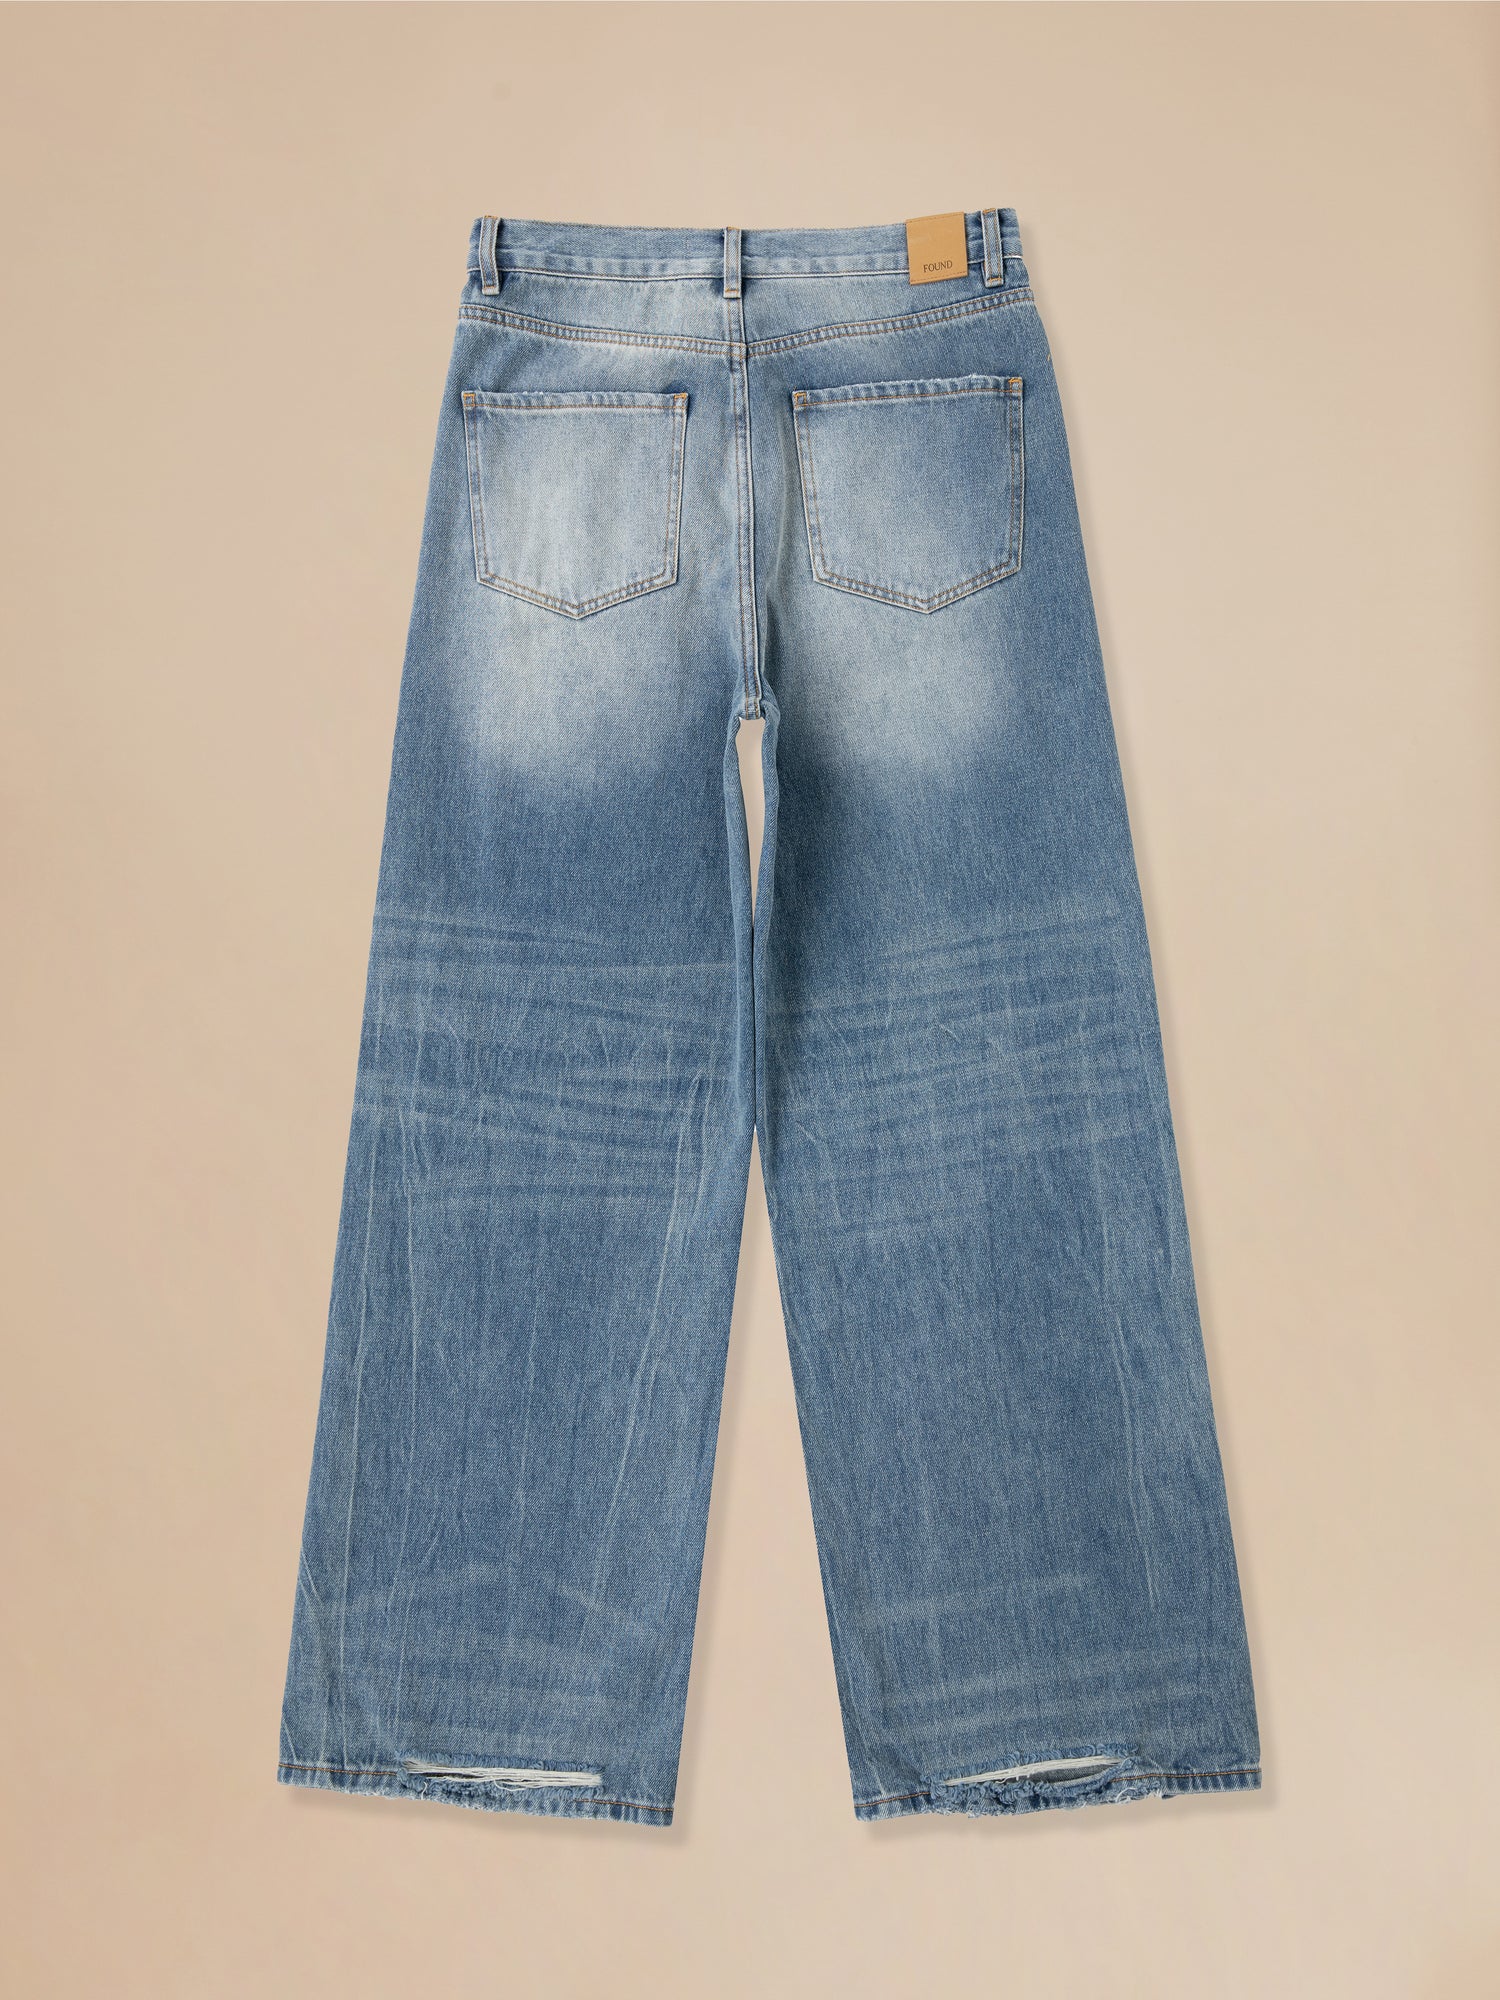 A pair of Found Lacy Baggy Jeans Blue with holes on the side.